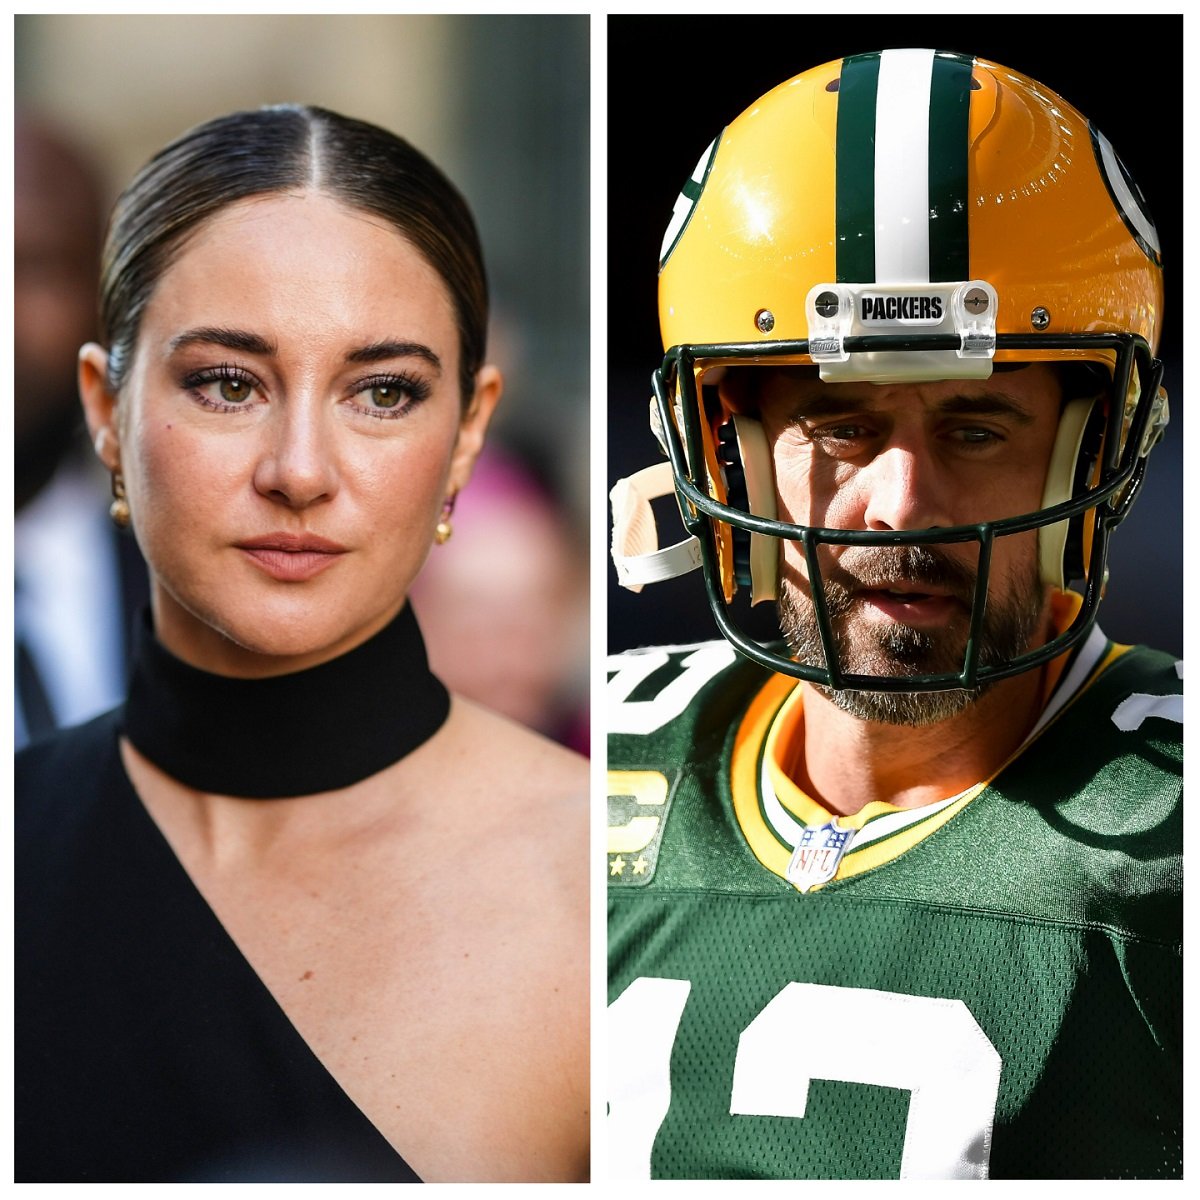 (L) Shailene Woodley photographed during Paris Fashion Week, (R) Aaron Rodgers photographed during game against the New York Giants